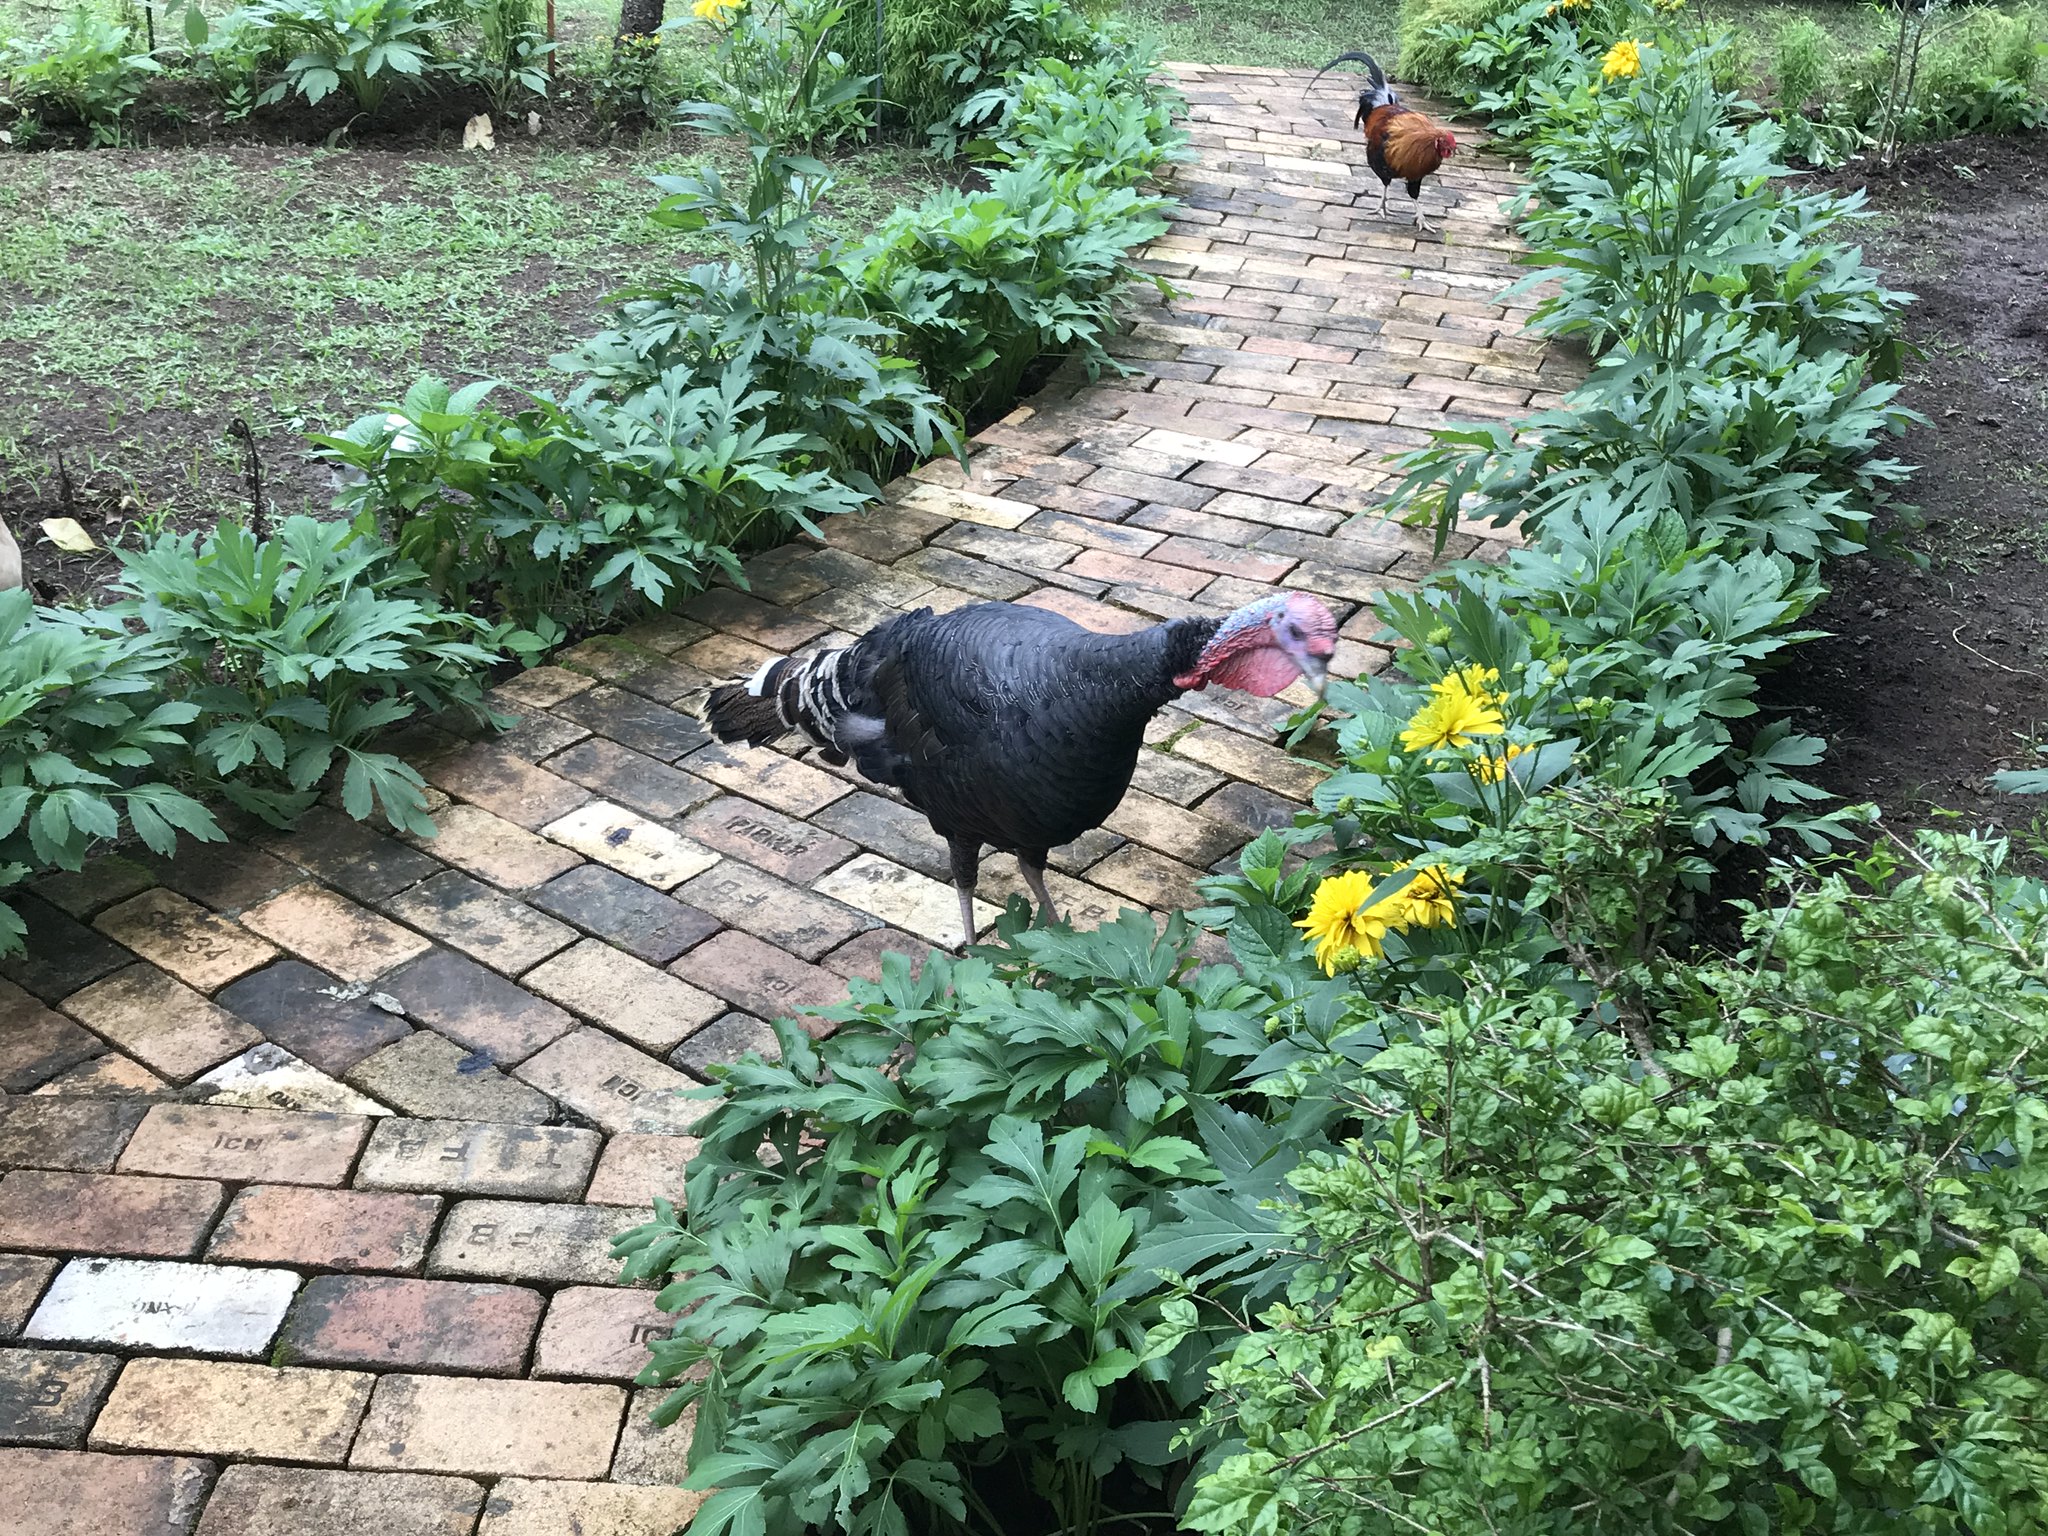 Turkey and rooster